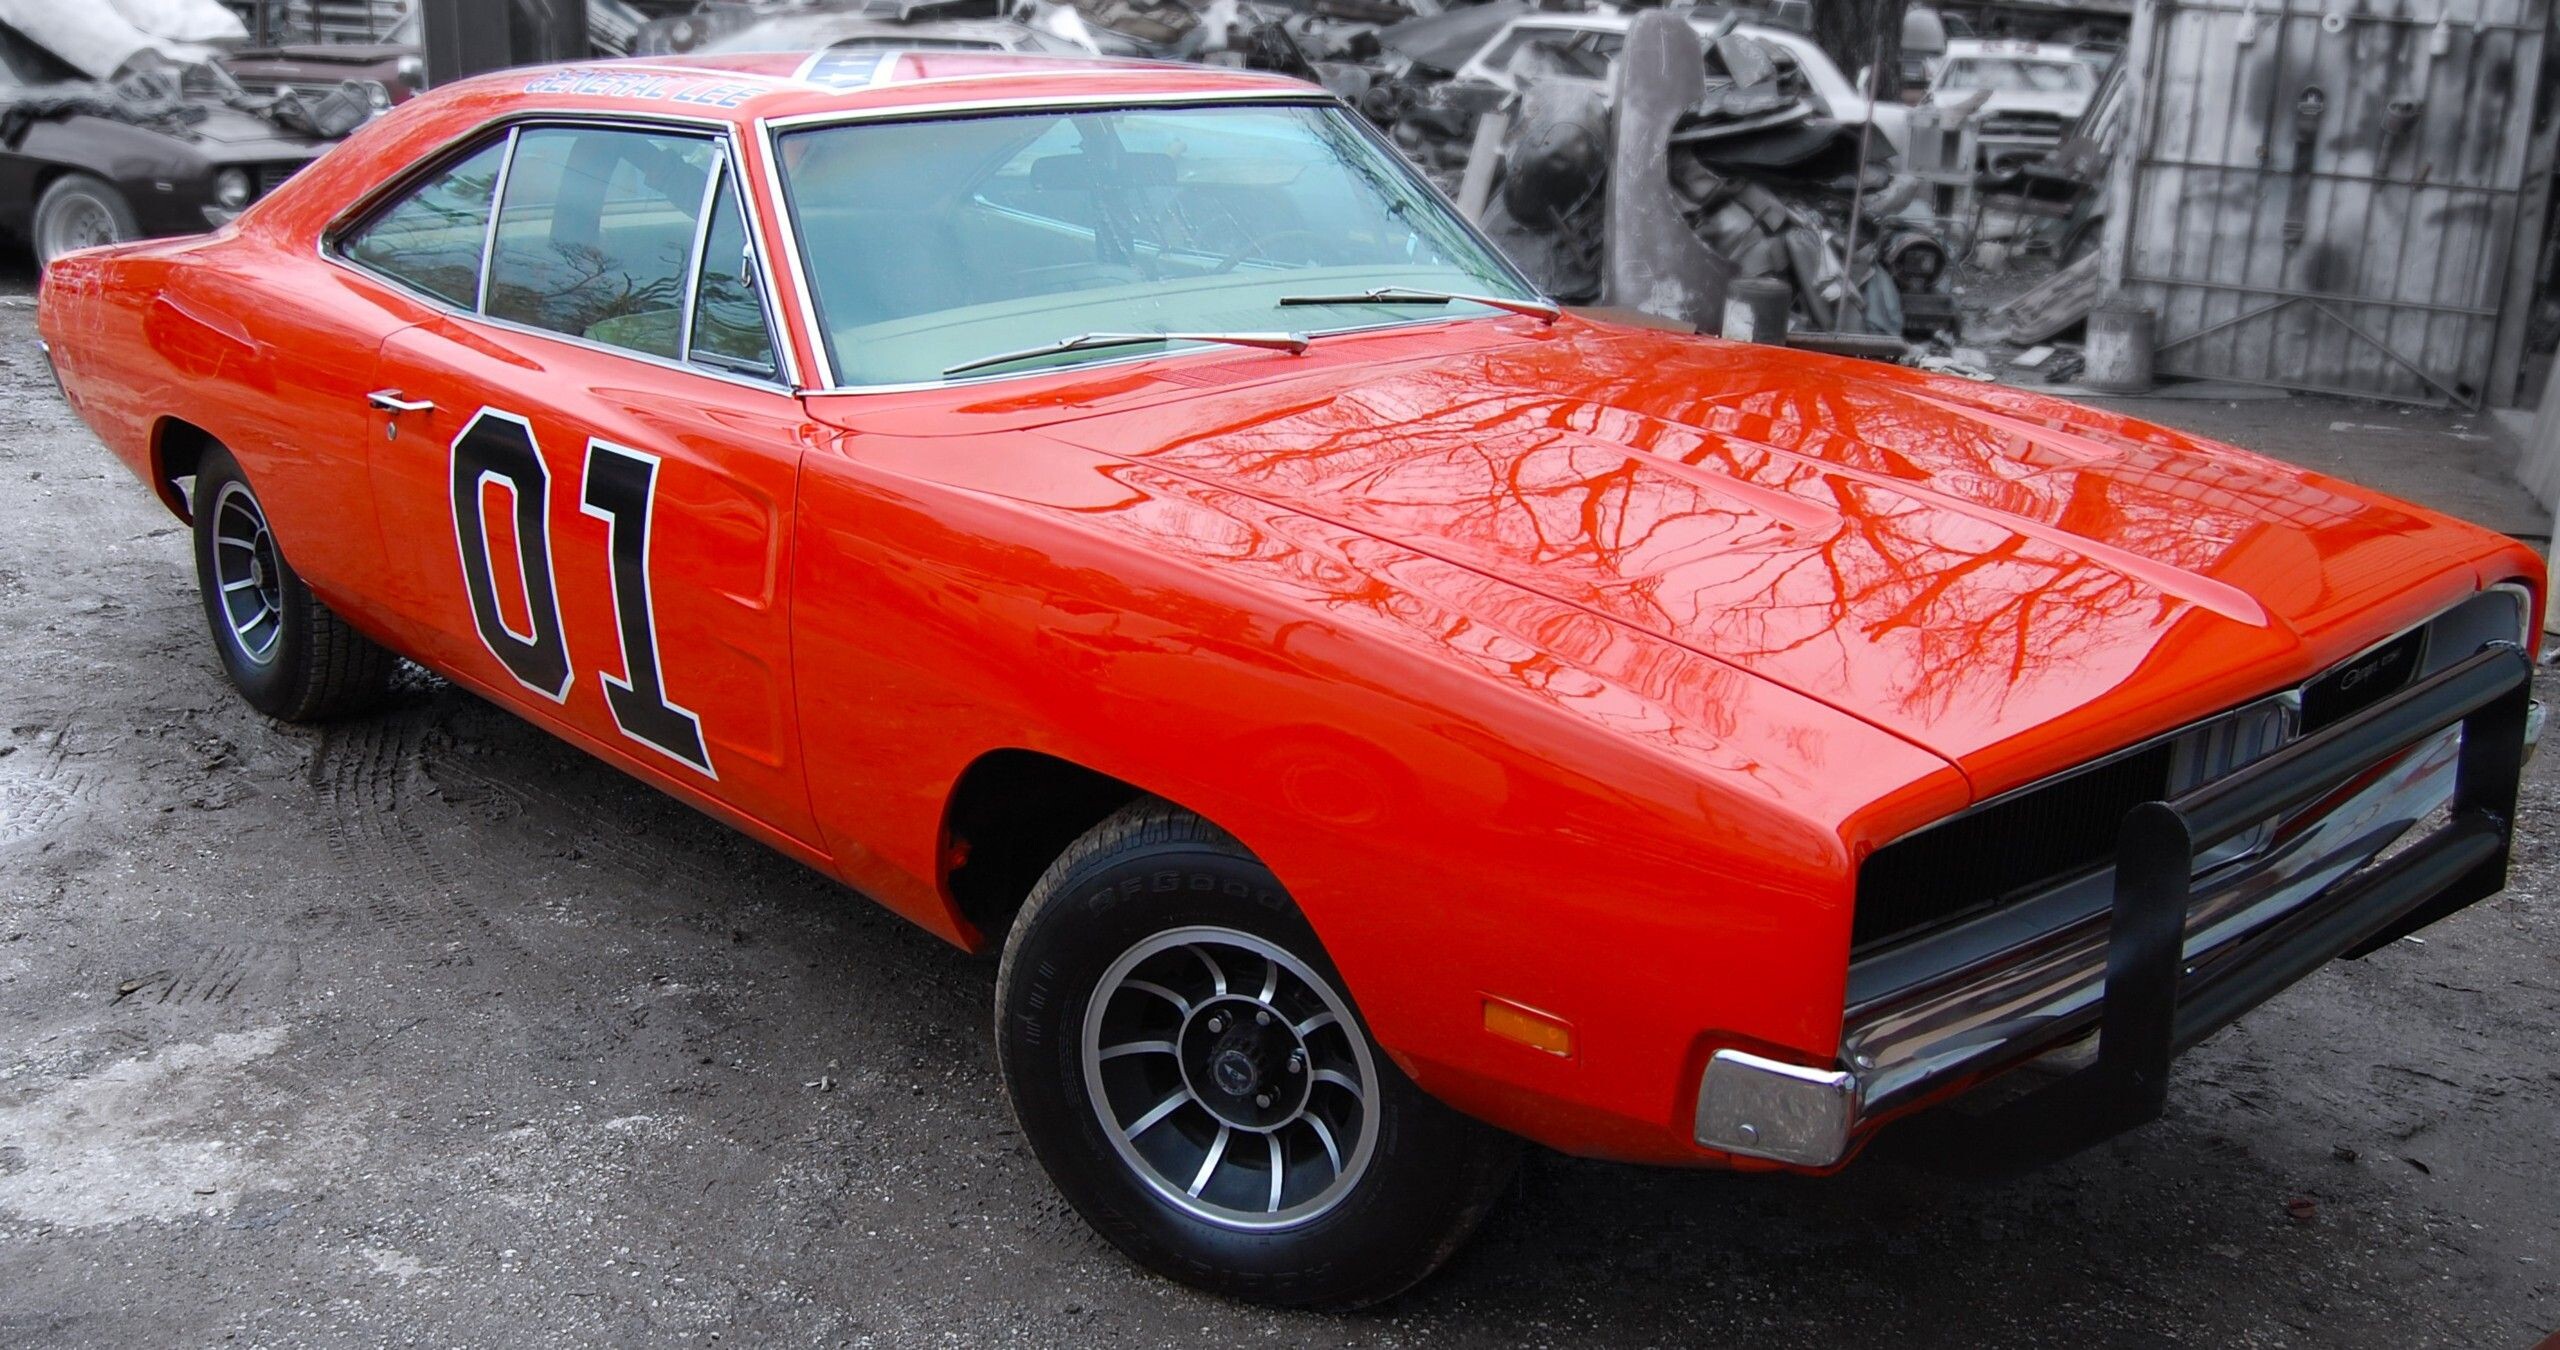 General Lee Car: Flag painted on the roof, The words "General Lee" over the doors, The number "01" on each door. 2560x1350 HD Wallpaper.